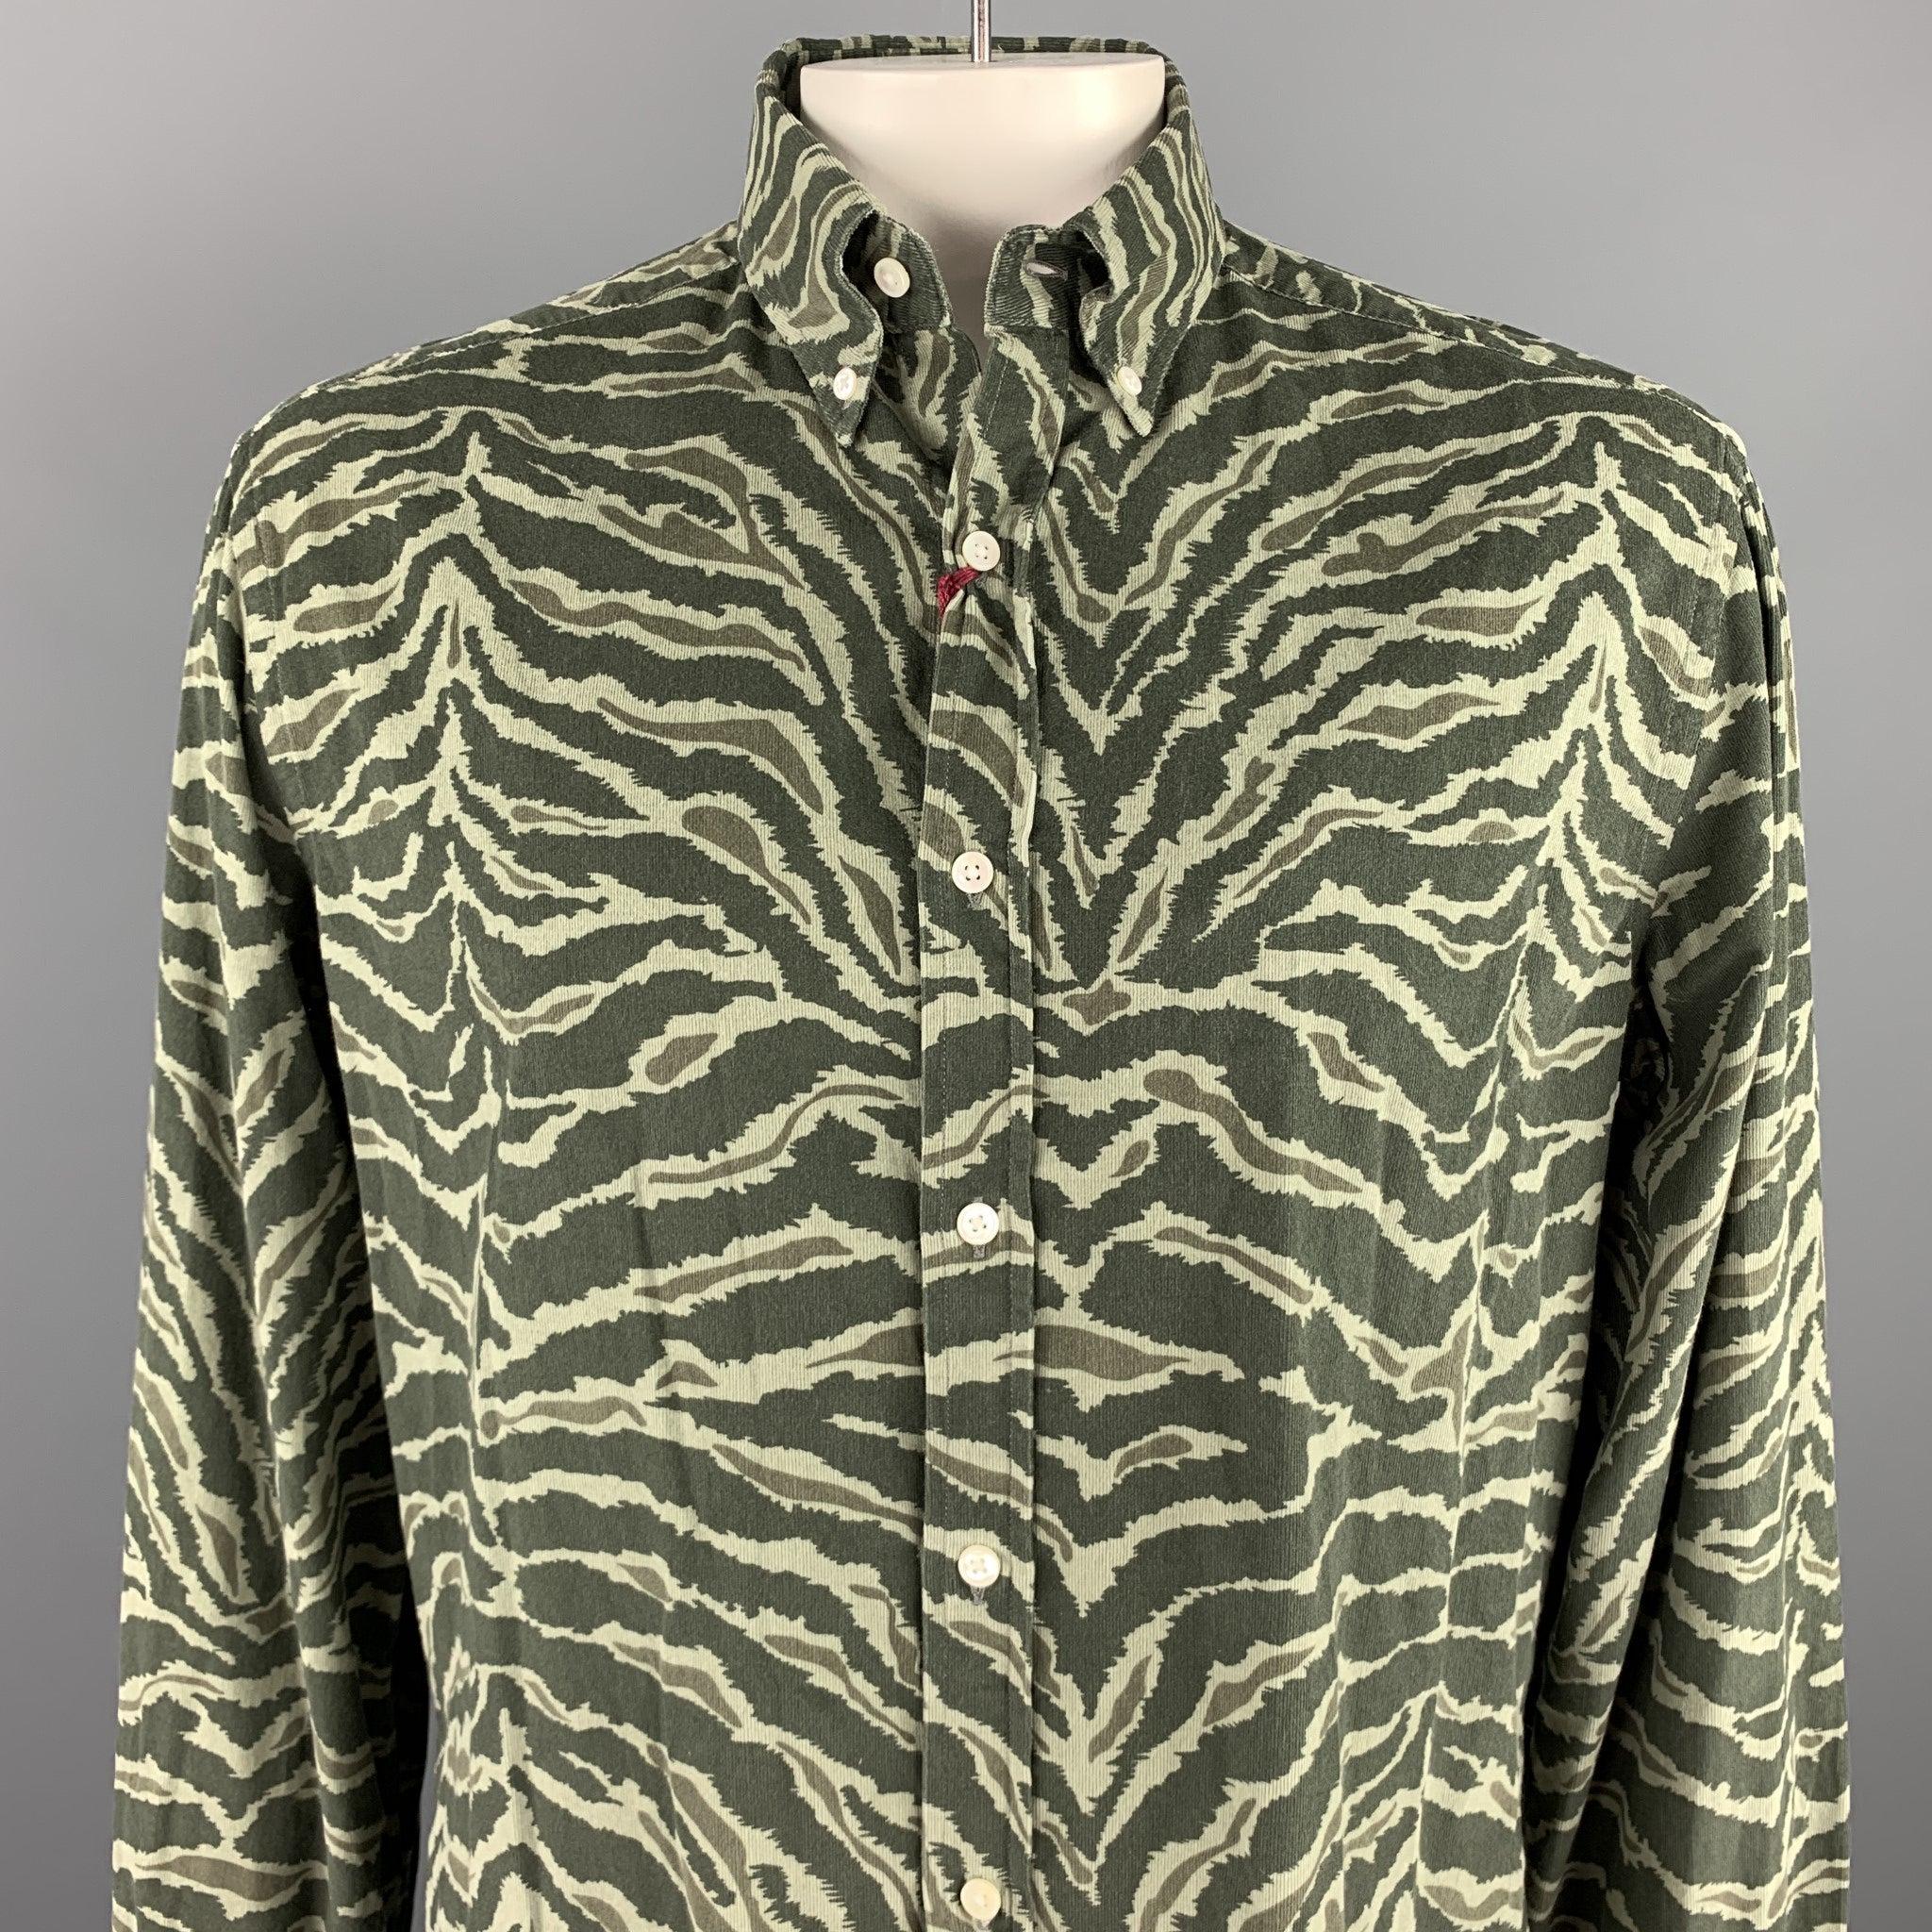 MICHAEL BASTIAN long sleeve shirt comes in a olive print cotton featuring a button down style and elbow patches. Made in Portugal.New With Tags. 

Marked:   XXL 

Measurements: 
 
Shoulder: 19.5 inches 
Chest: 48 inches 
Sleeve: 29 inches 
Length: